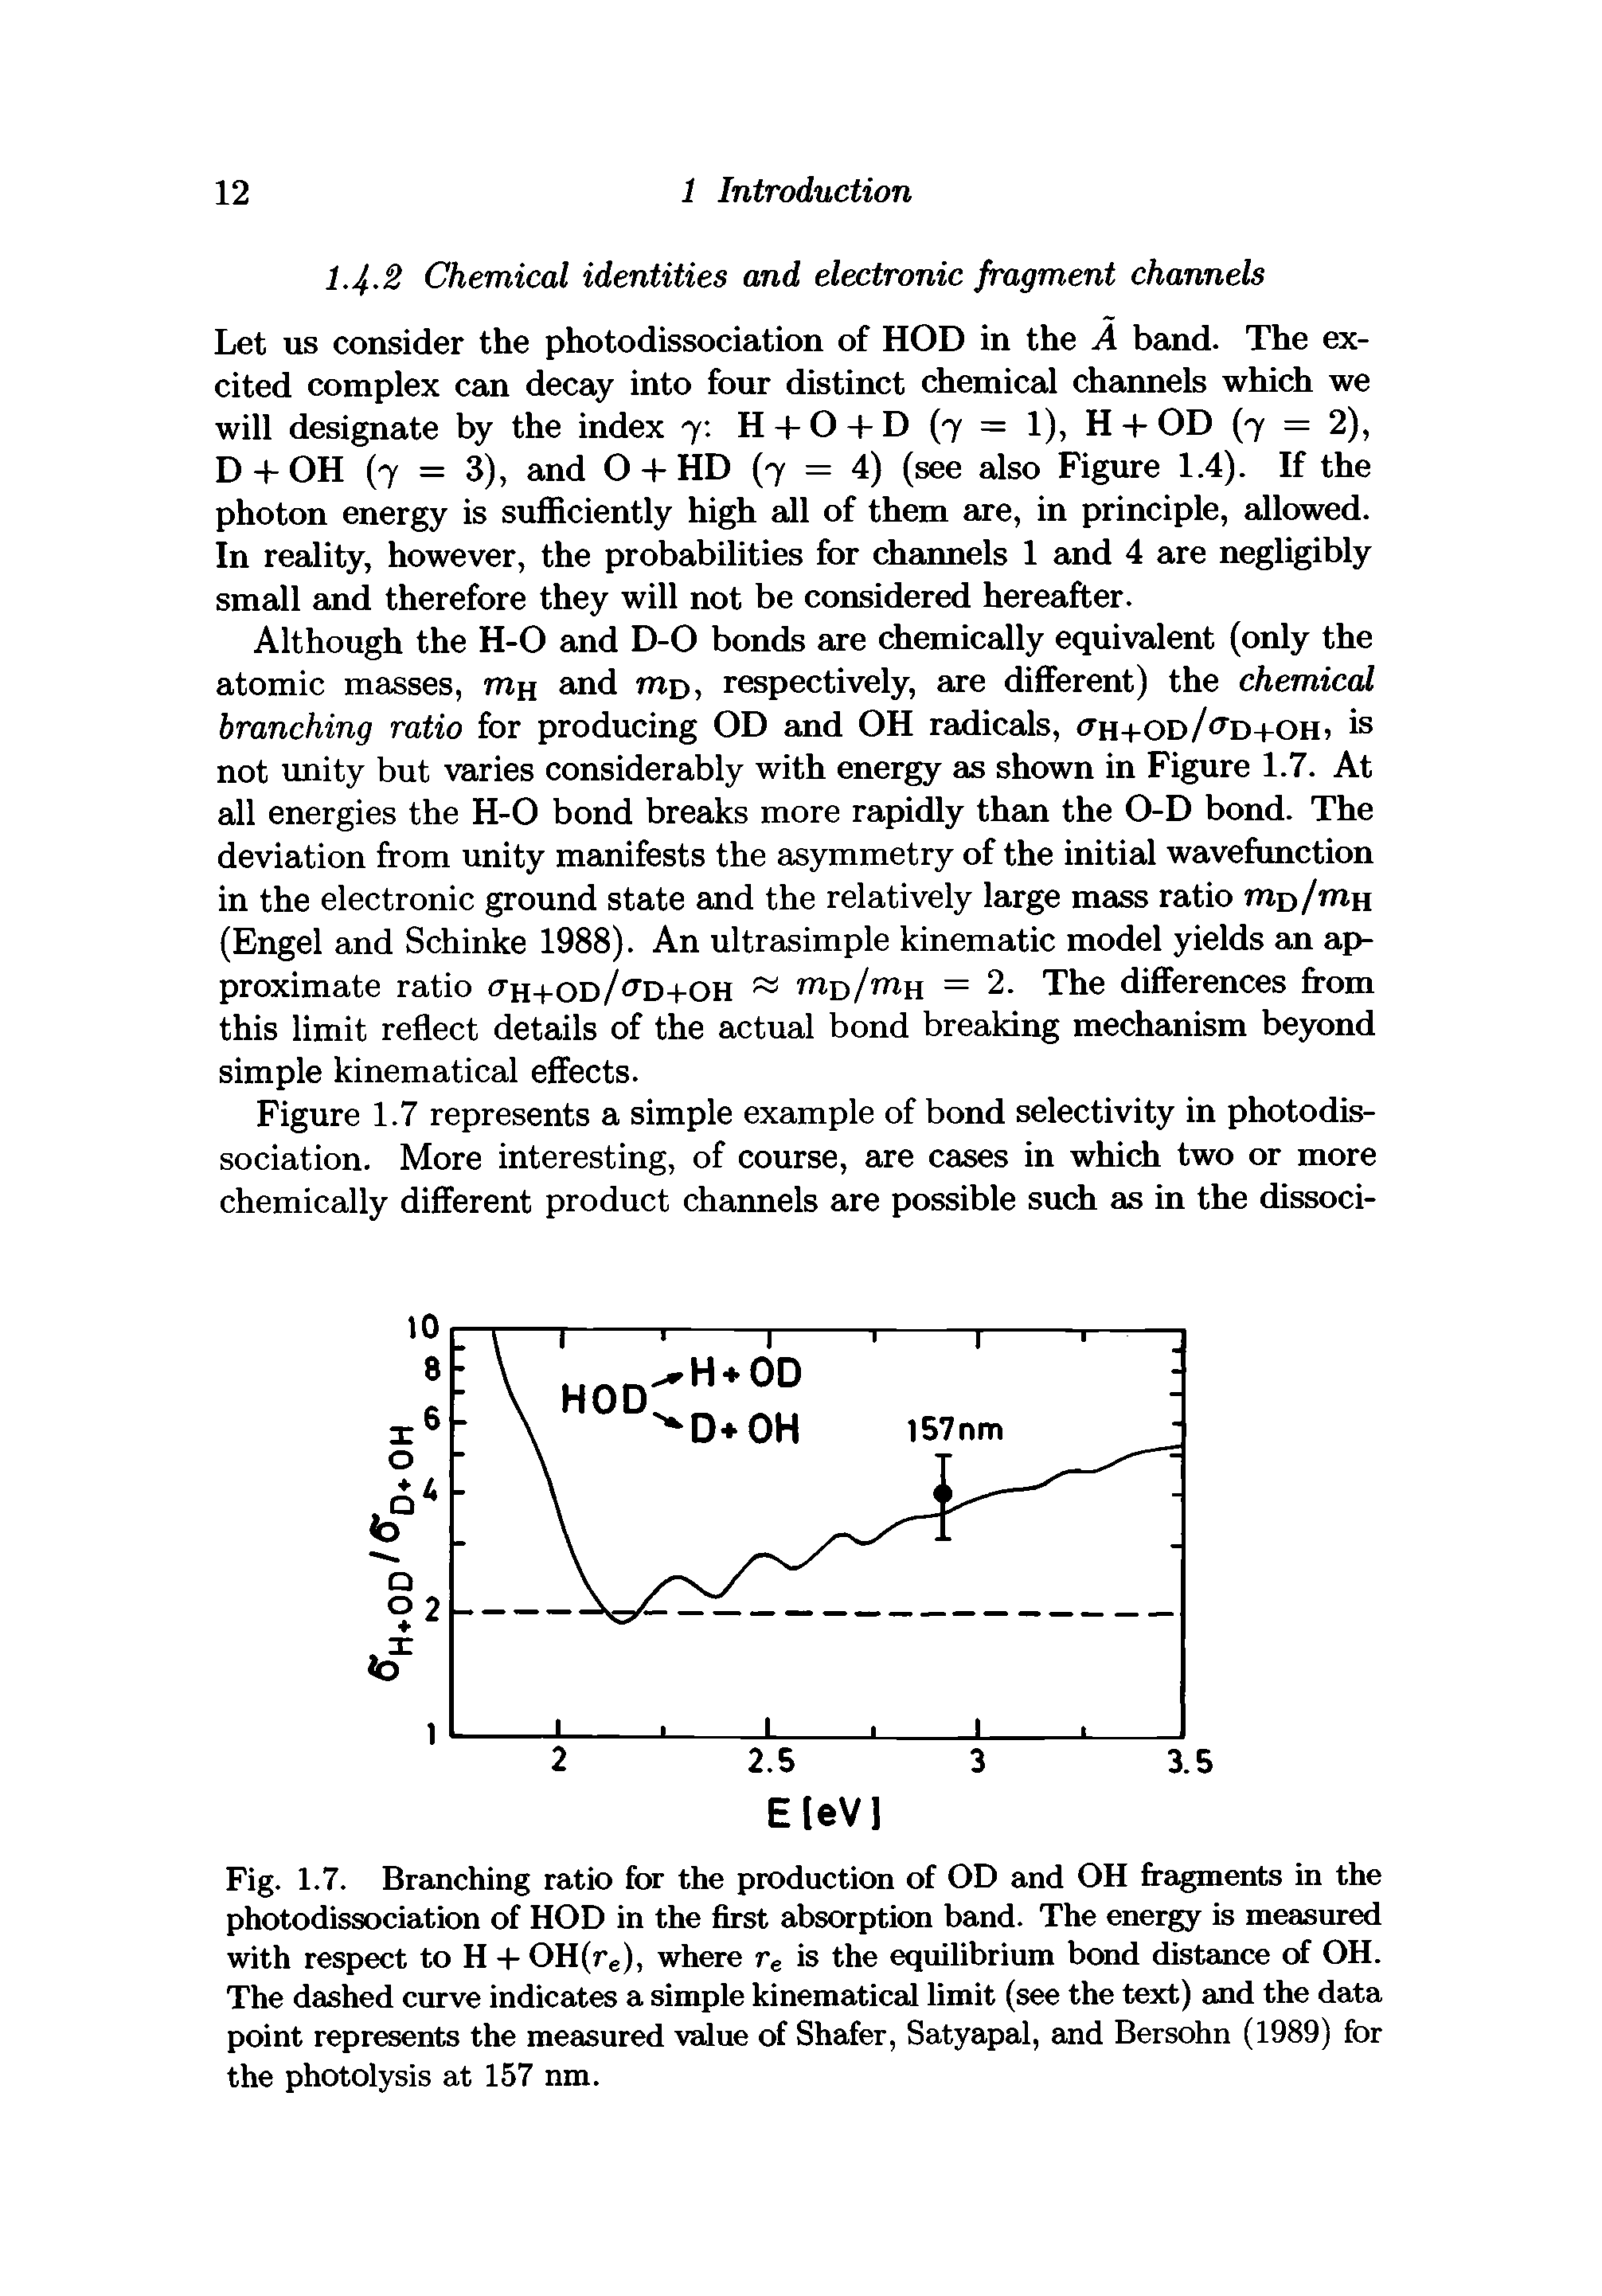 Fig. 1.7. Branching ratio for the production of OD and OH fragments in the photodissociation of HOD in the first absorption band. The energy is measured with respect to H -I- OH(re), where re is the equilibrium bond distance of OH. The dashed curve indicates a simple kinematical limit (see the text) and the data point represents the measured value of Shafer, Satyapal, and Bersohn (1989) for the photolysis at 157 nm.